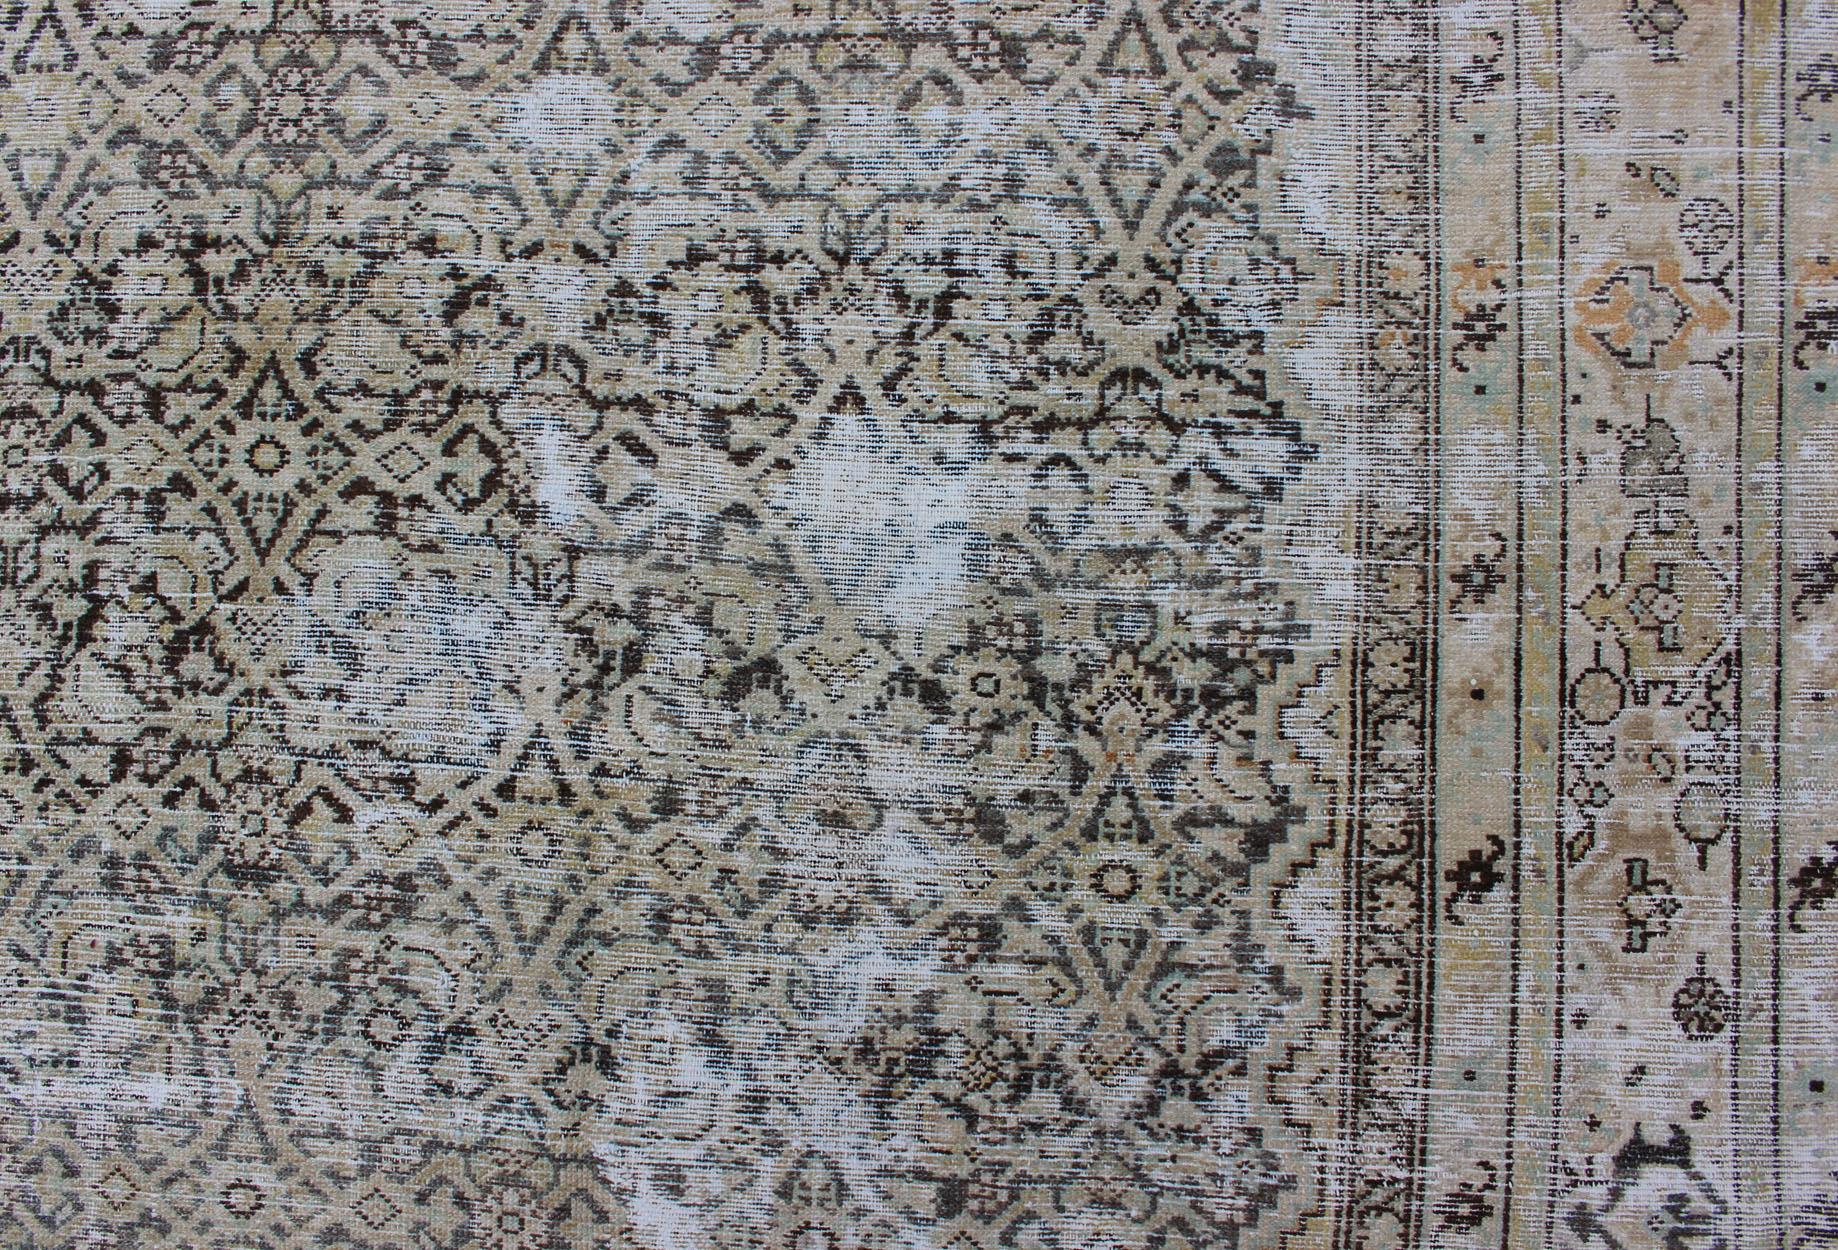 Large Gallery Persian Malayer Runner with Herati Design in Gray and Earth Tones 1